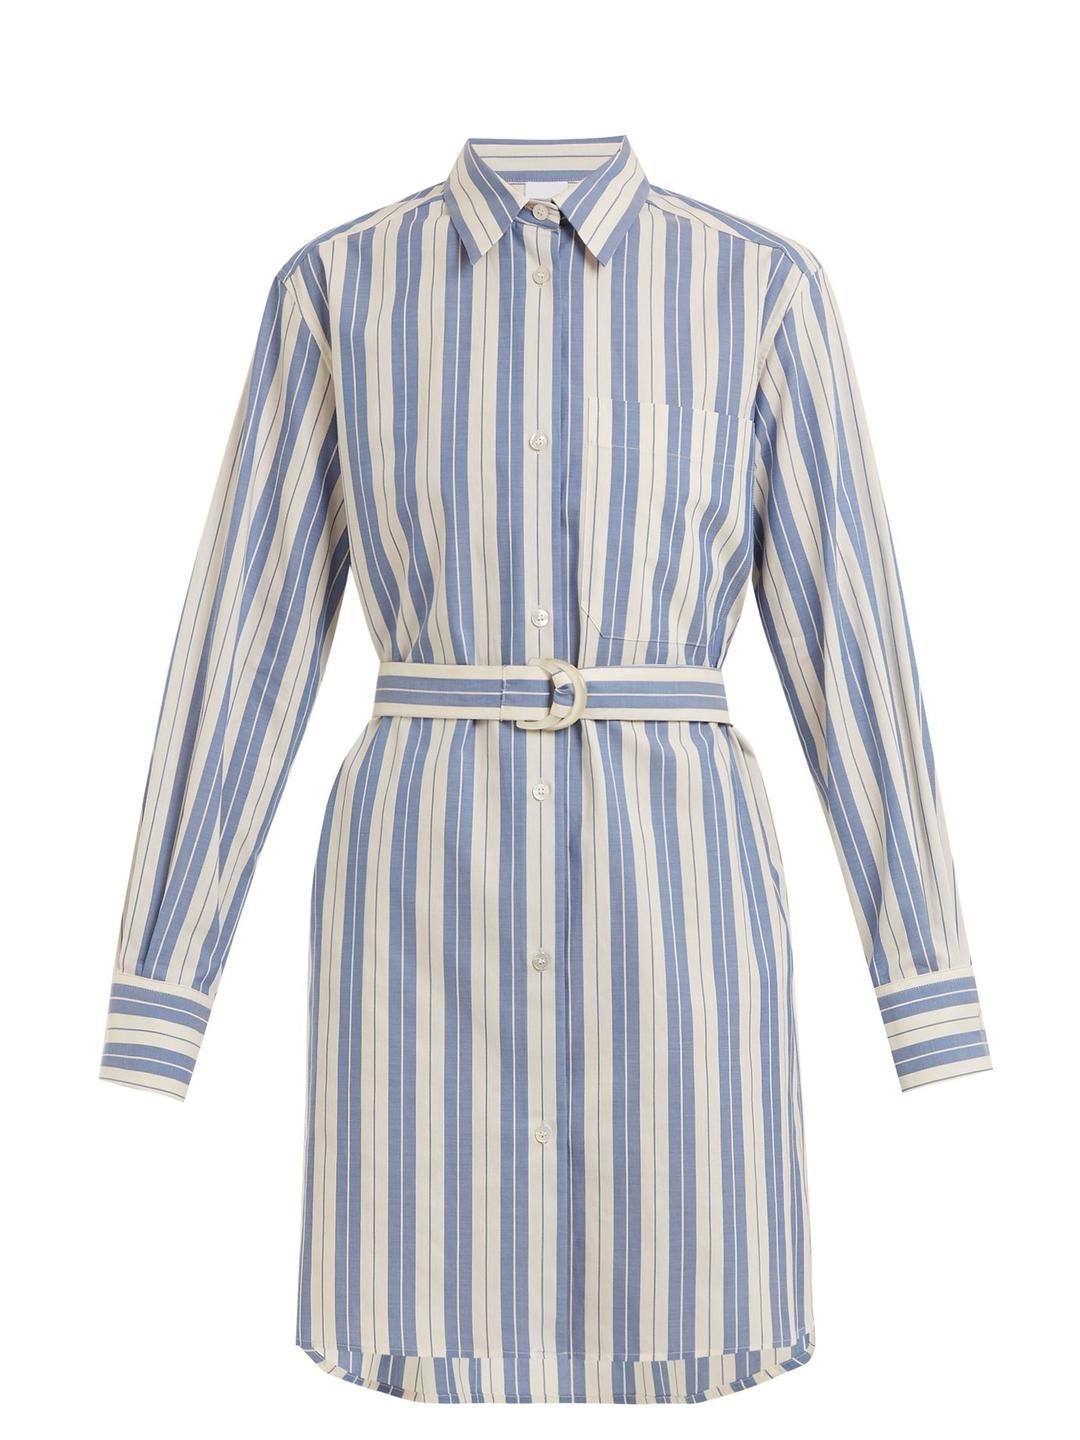 17 Button-Down Shirtdresses That Will Impress Your Boss | Who What Wear